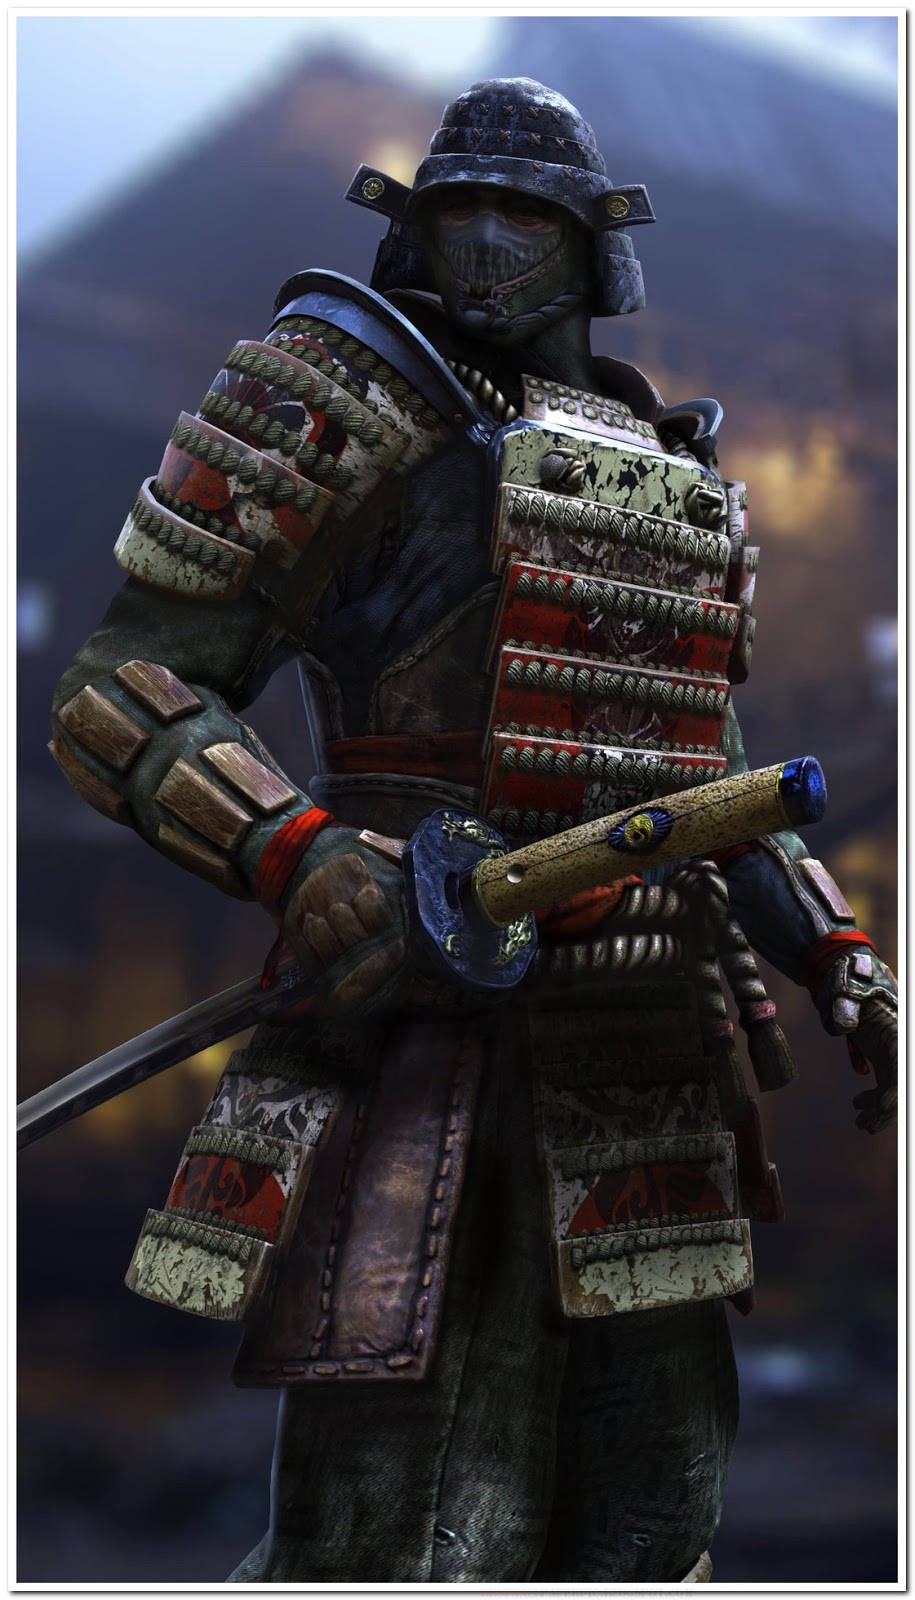 Epic Battle Stance Of Orochi Warrior From For Honor Game On Phone Screen Background